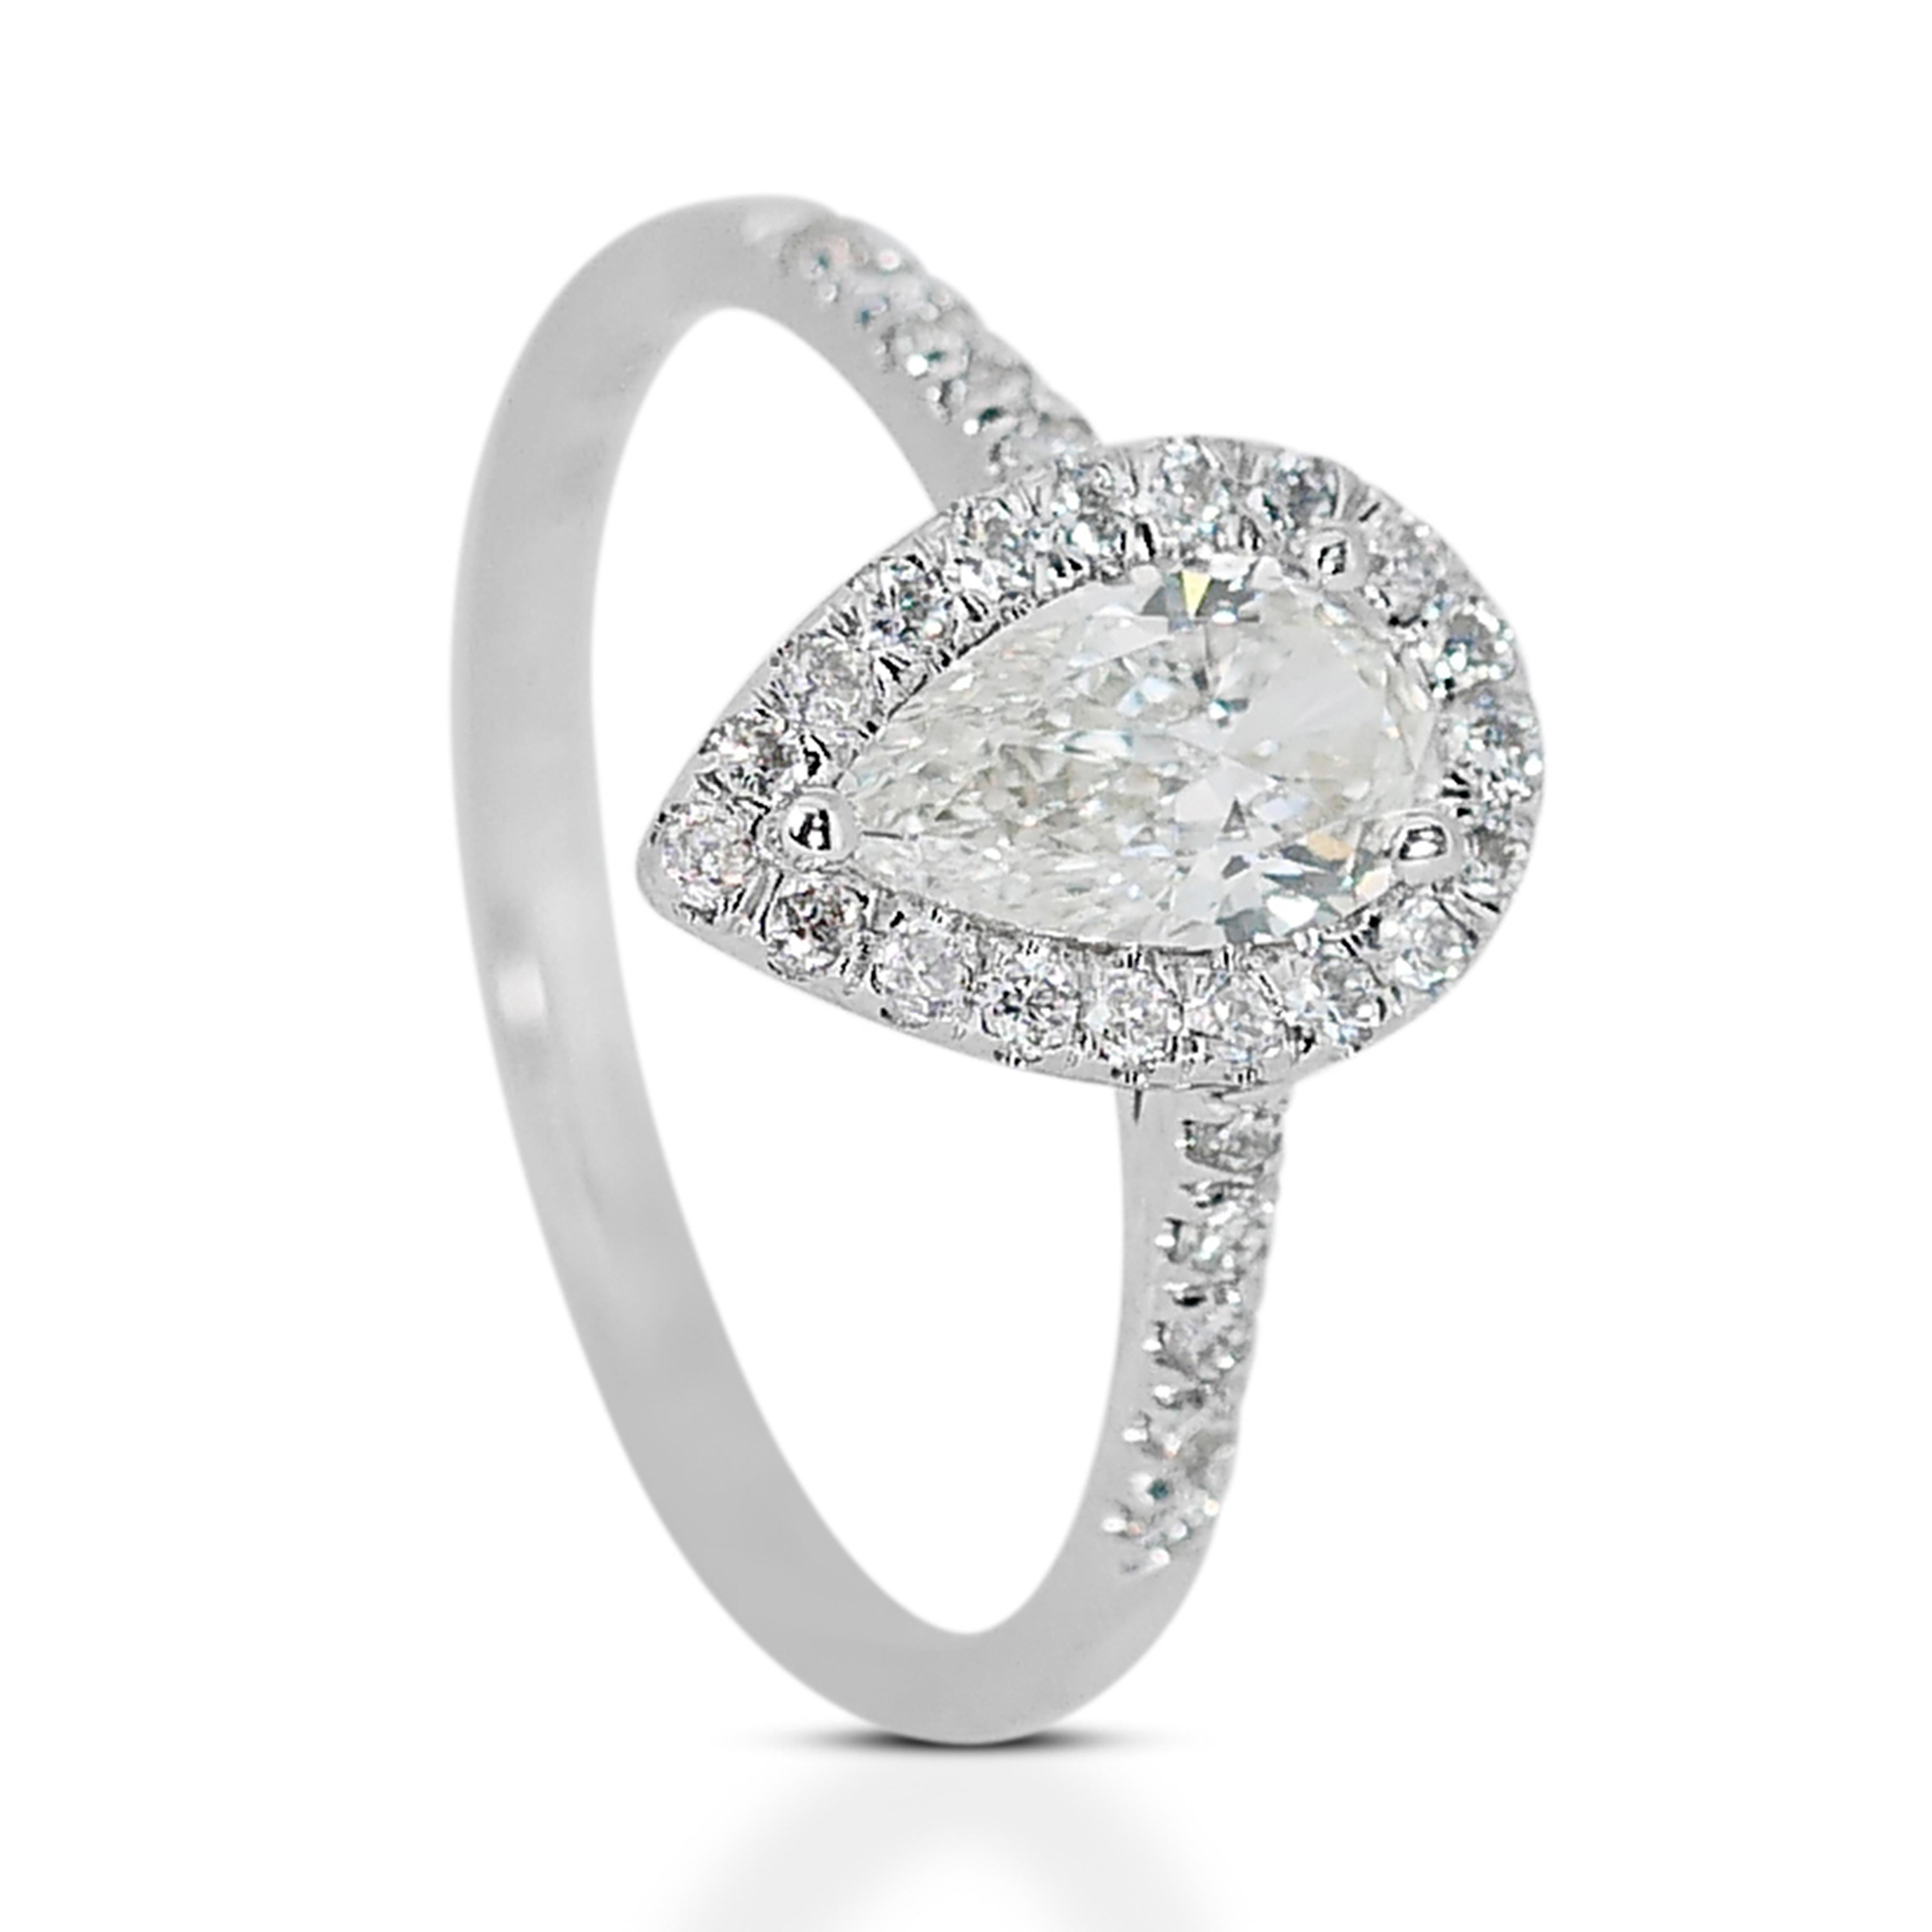 Stunning 1.97ct Pear-Shaped Diamond Halo Ring in 18k White Gold - GIA Certified For Sale 3